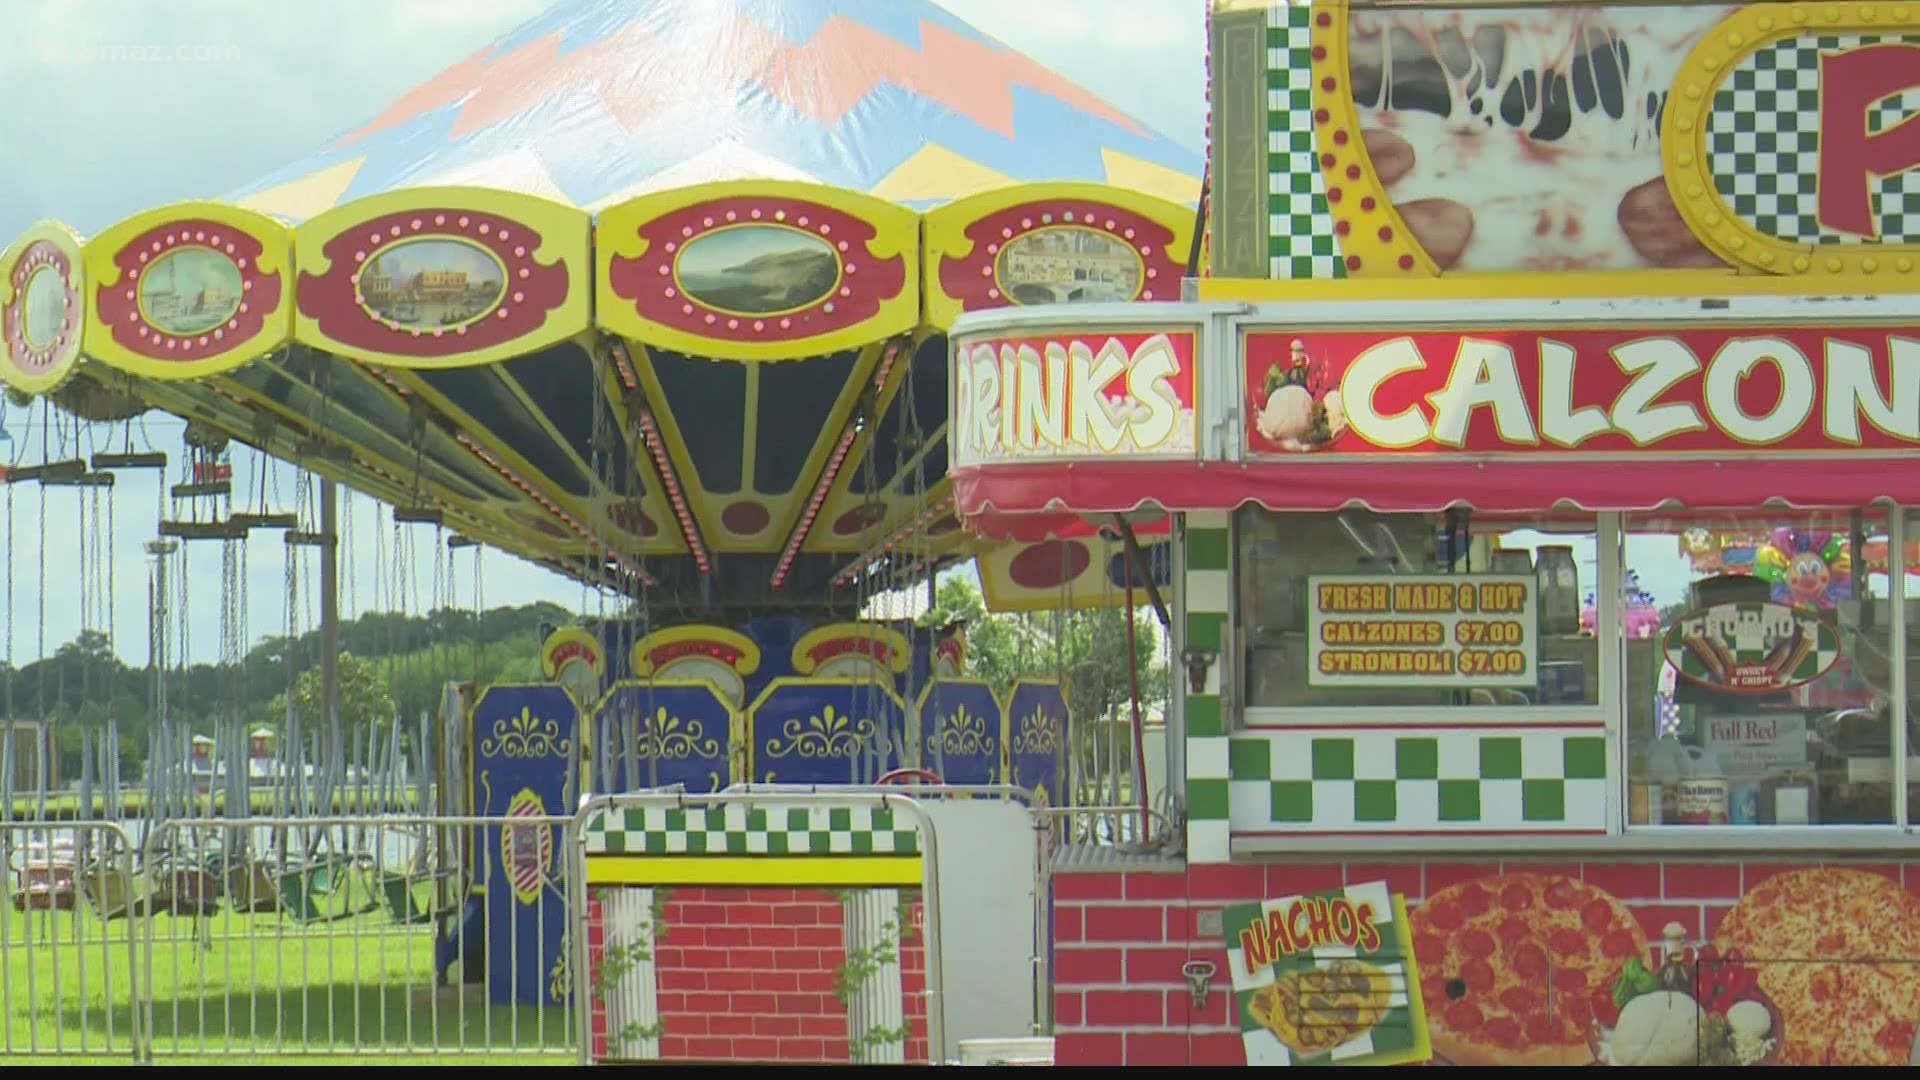 You'll find 40 rides, carnival games and all your favorite treats at the Georgia National Fairgrounds May 20 - 31st